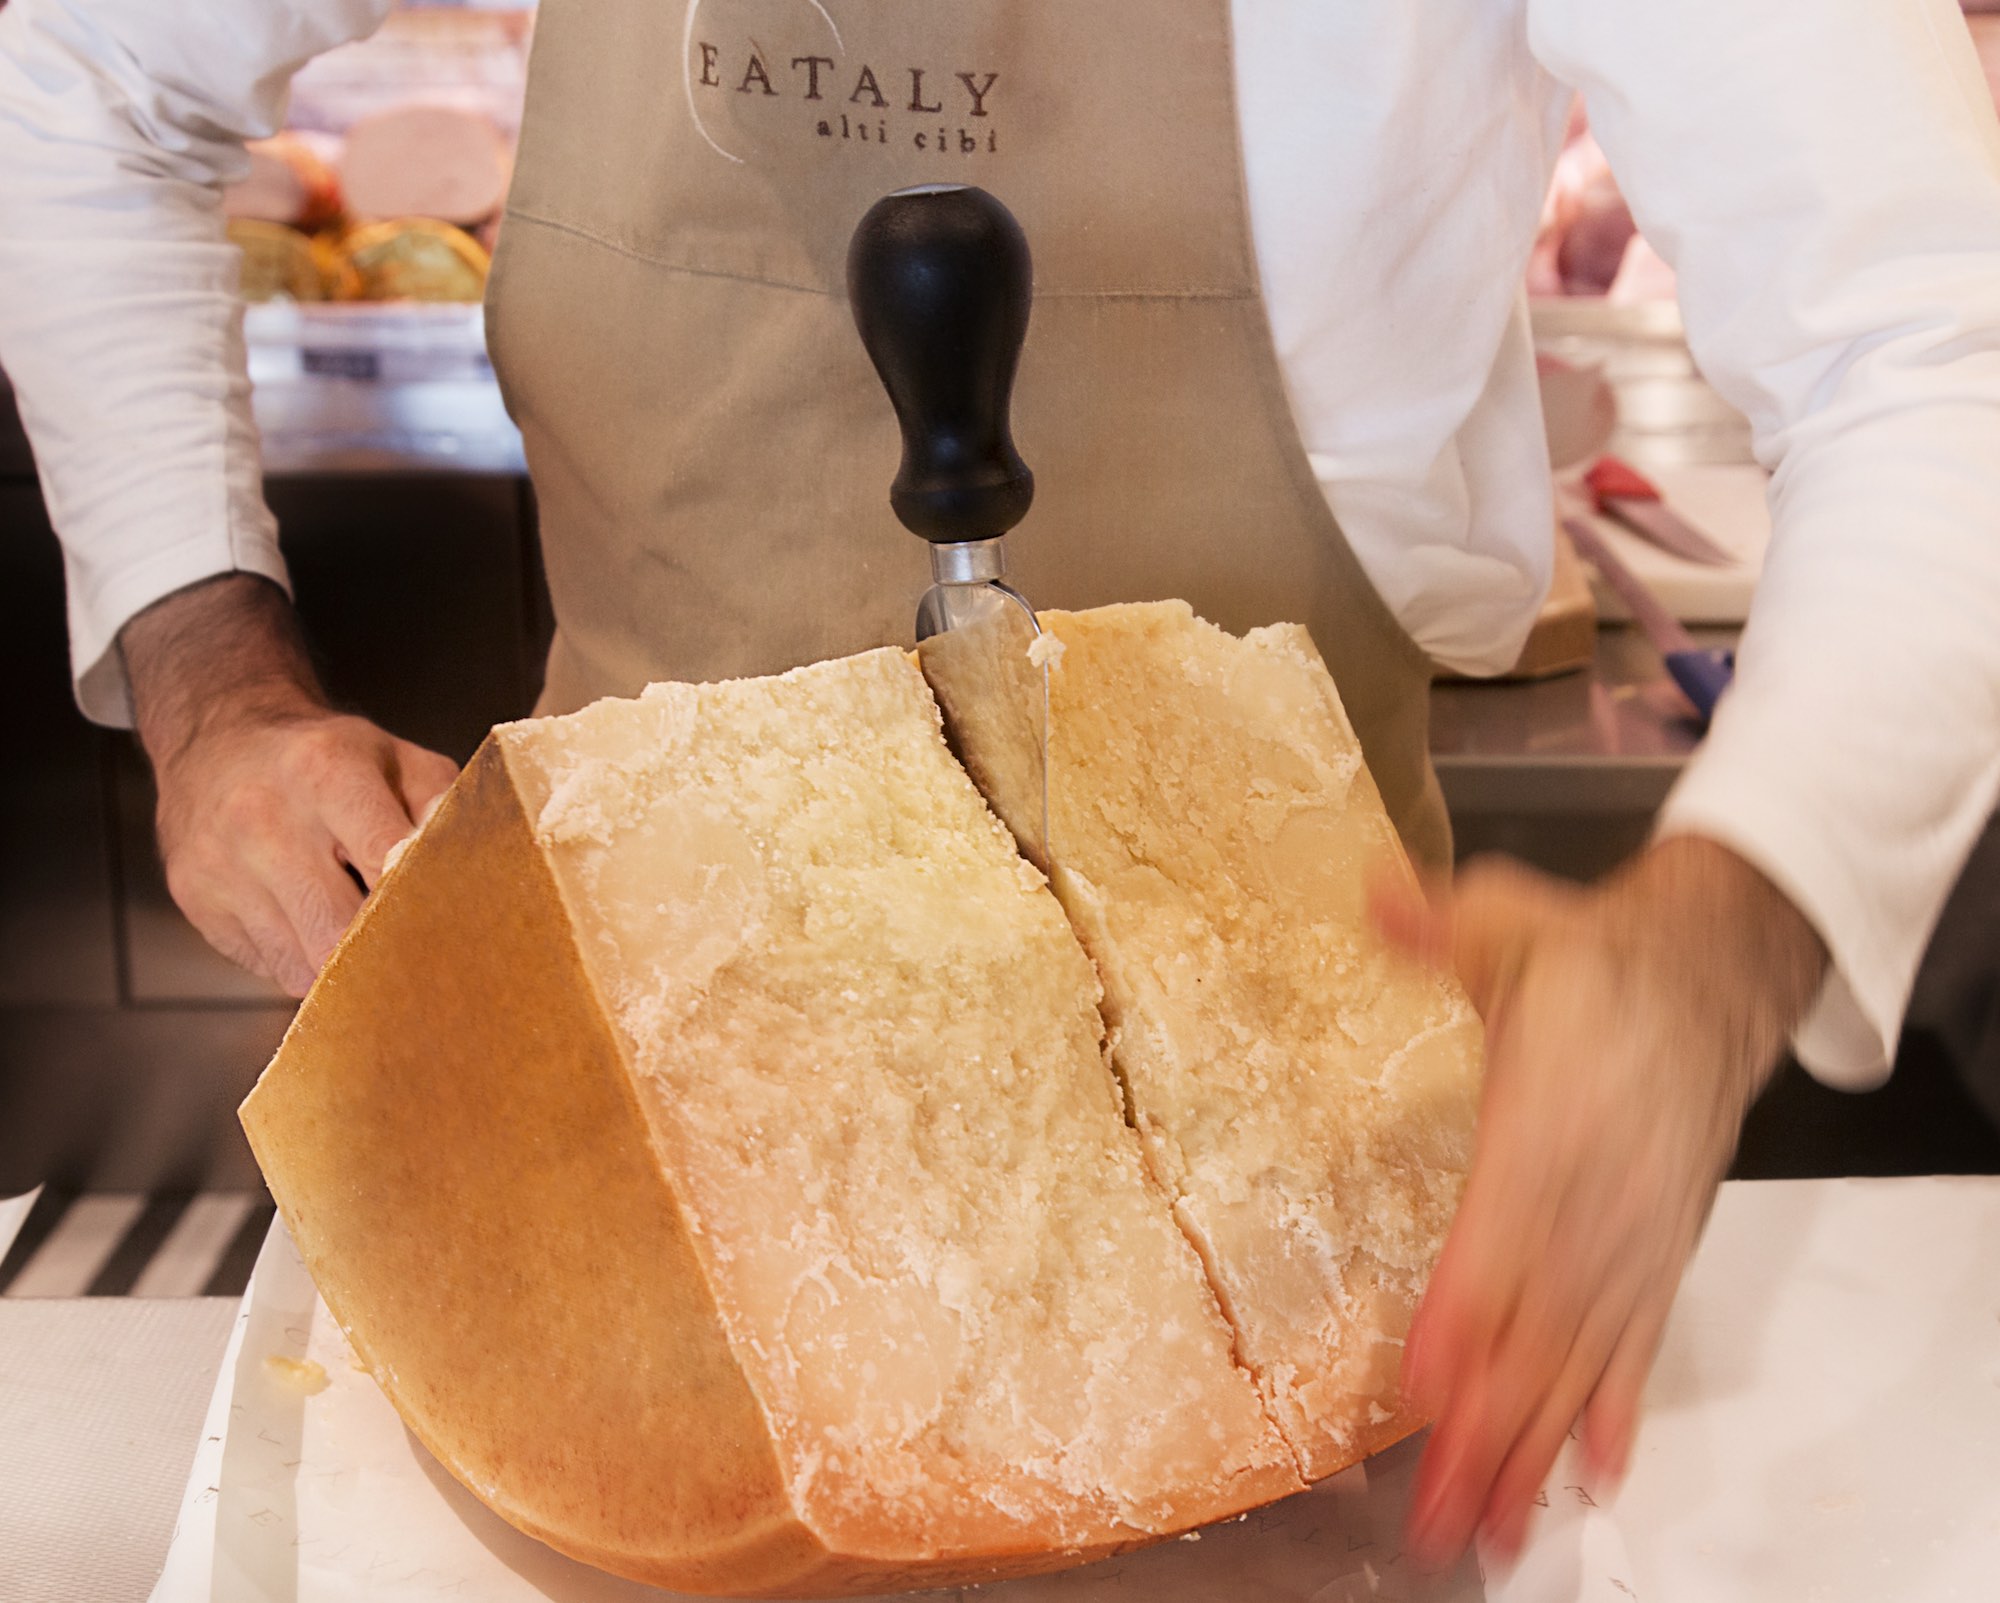 Parmigiano Reggiano is not all the same